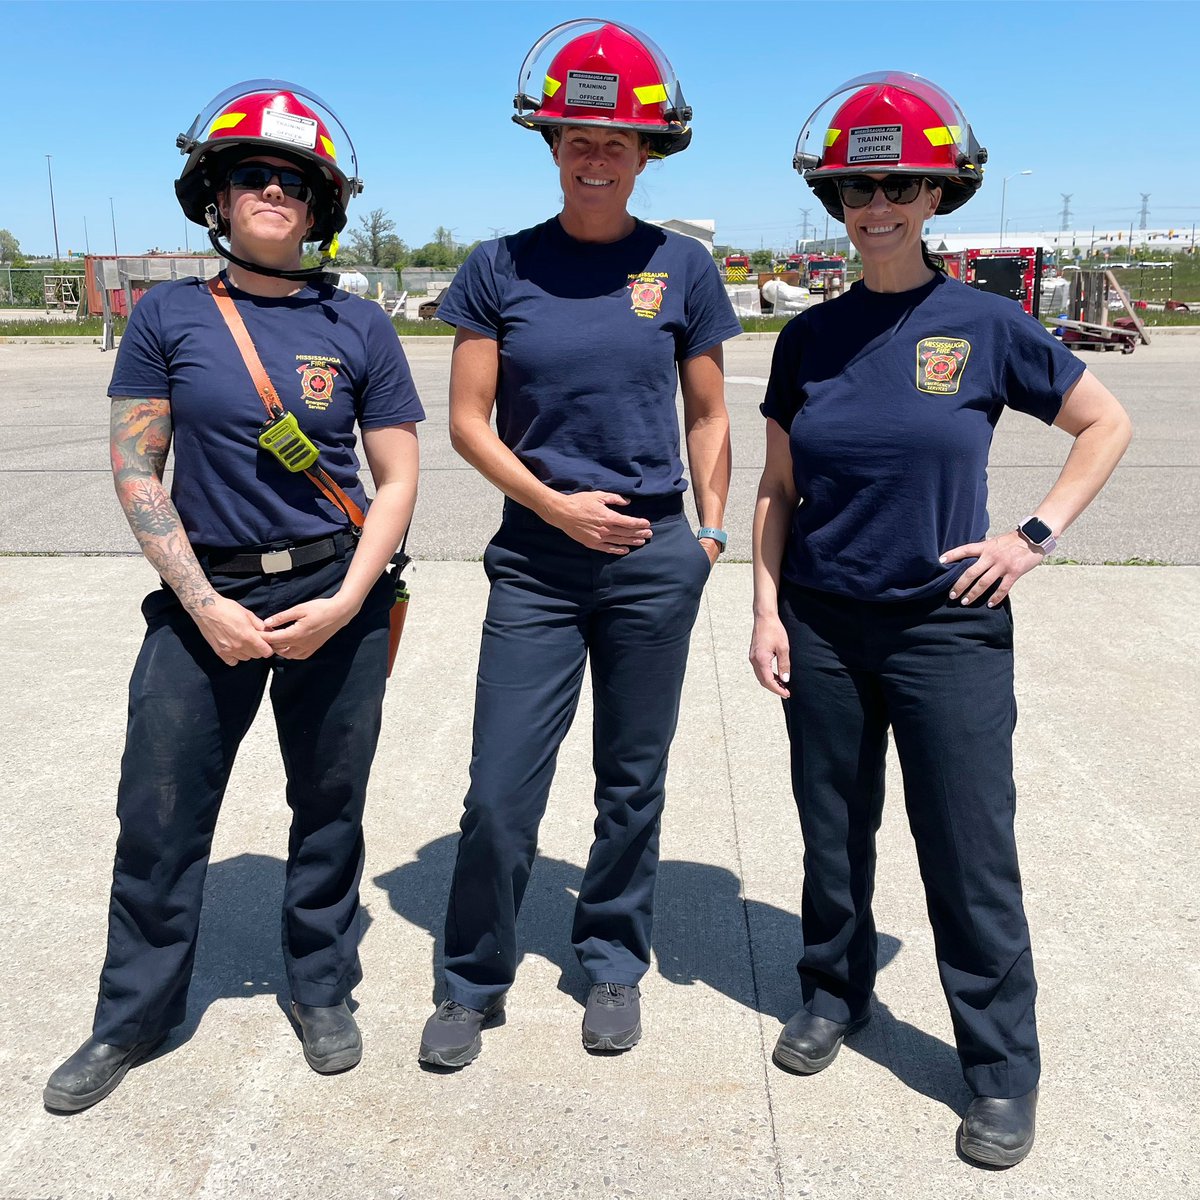 The best way to succeed is to discover what you love & then find a way to offer it to others in the form of service. So #proud to work beside 2 incredible women. A #TO & a #STI Enjoy working with & learning from these two!! #womeninfirefighting #training #recruit  #strongwomen 🚒